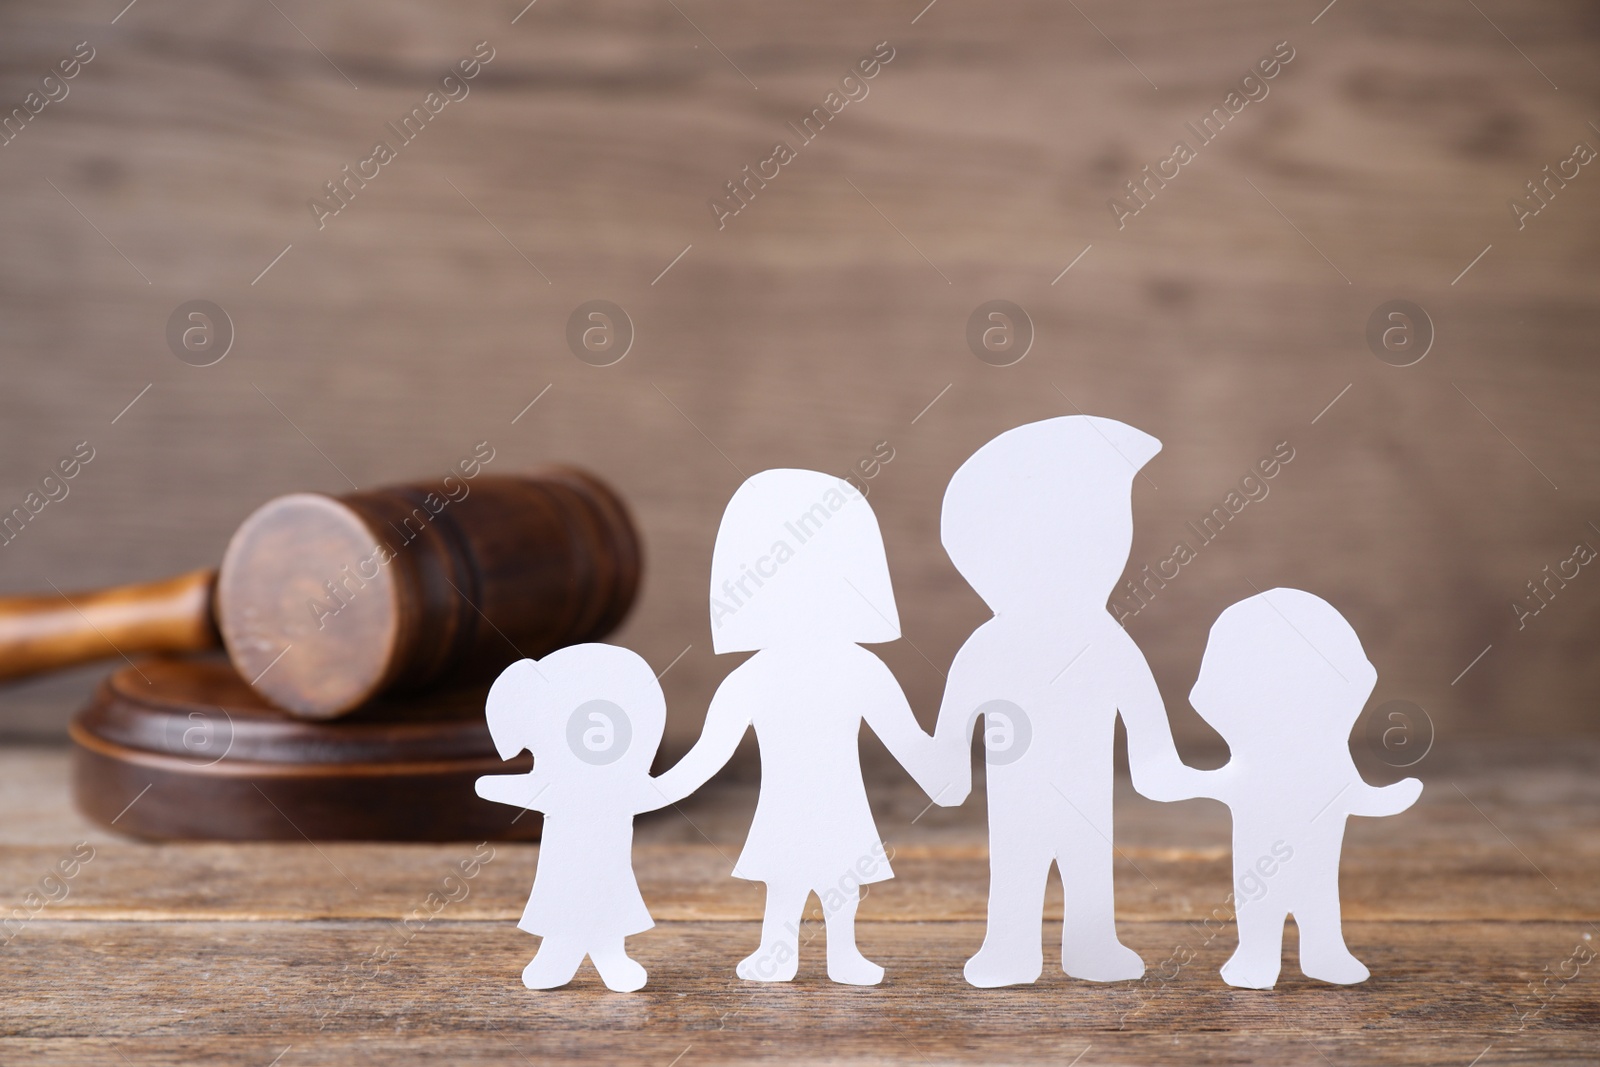 Image of Family figure and judge gavel on wooden table. Family law concept